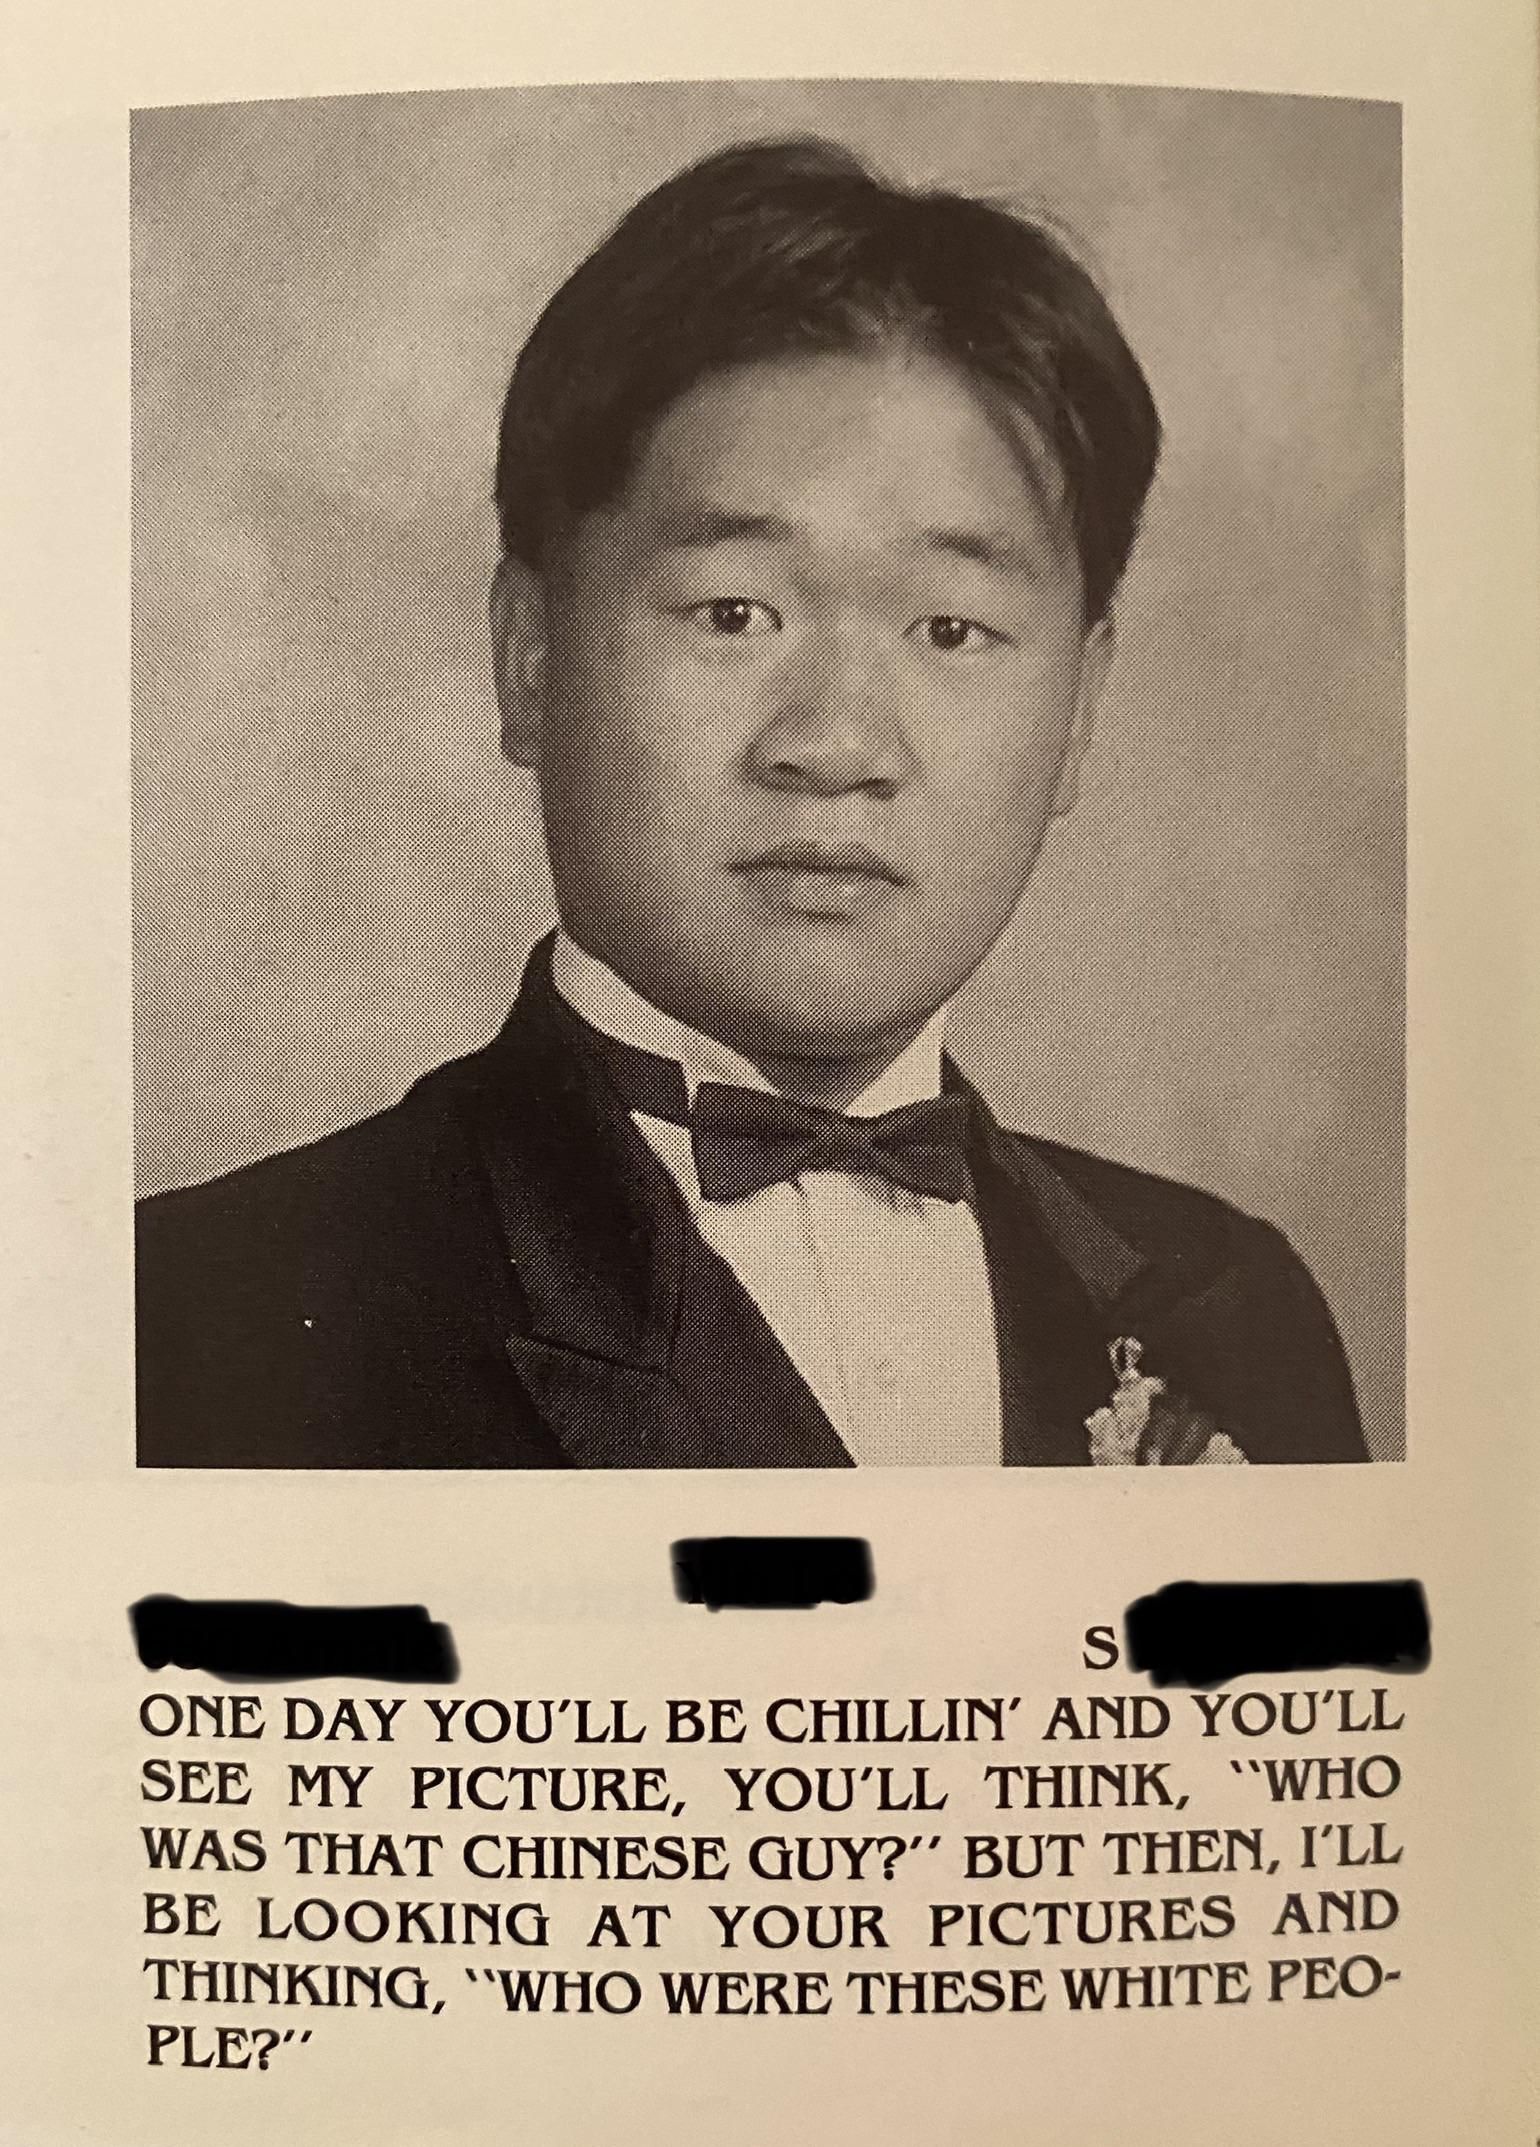 Just got called out while flipping through my 1995 high school yearbook